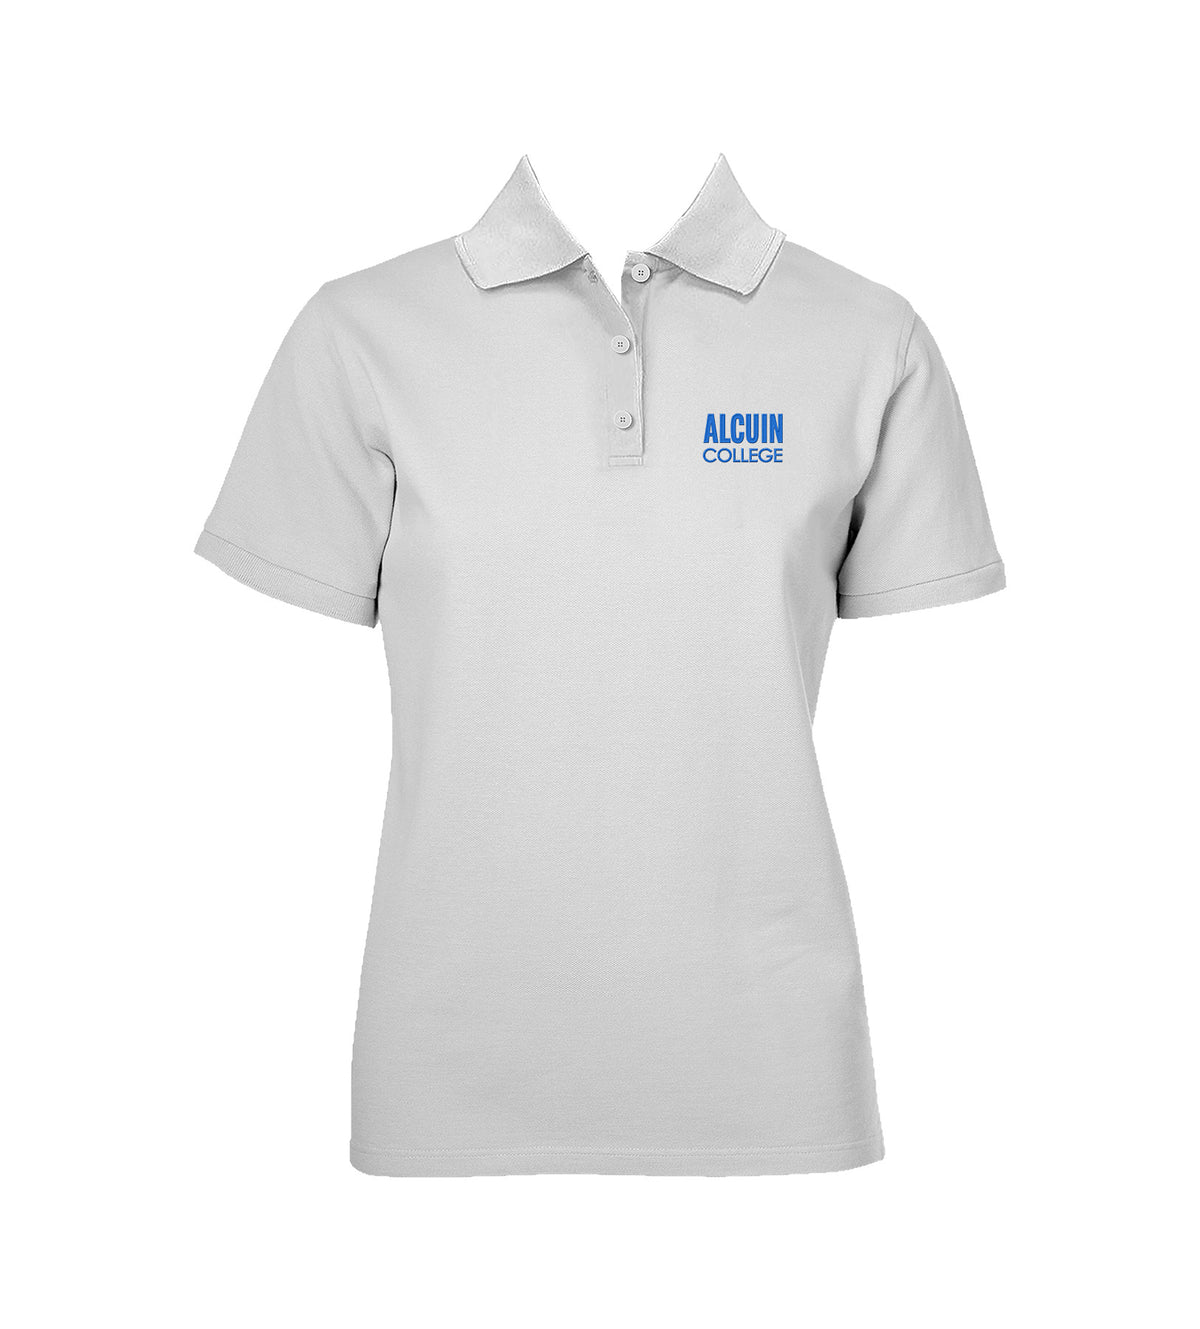 ALCUIN COLLEGE WHITE GOLF SHIRT, GIRLS, YOUTH